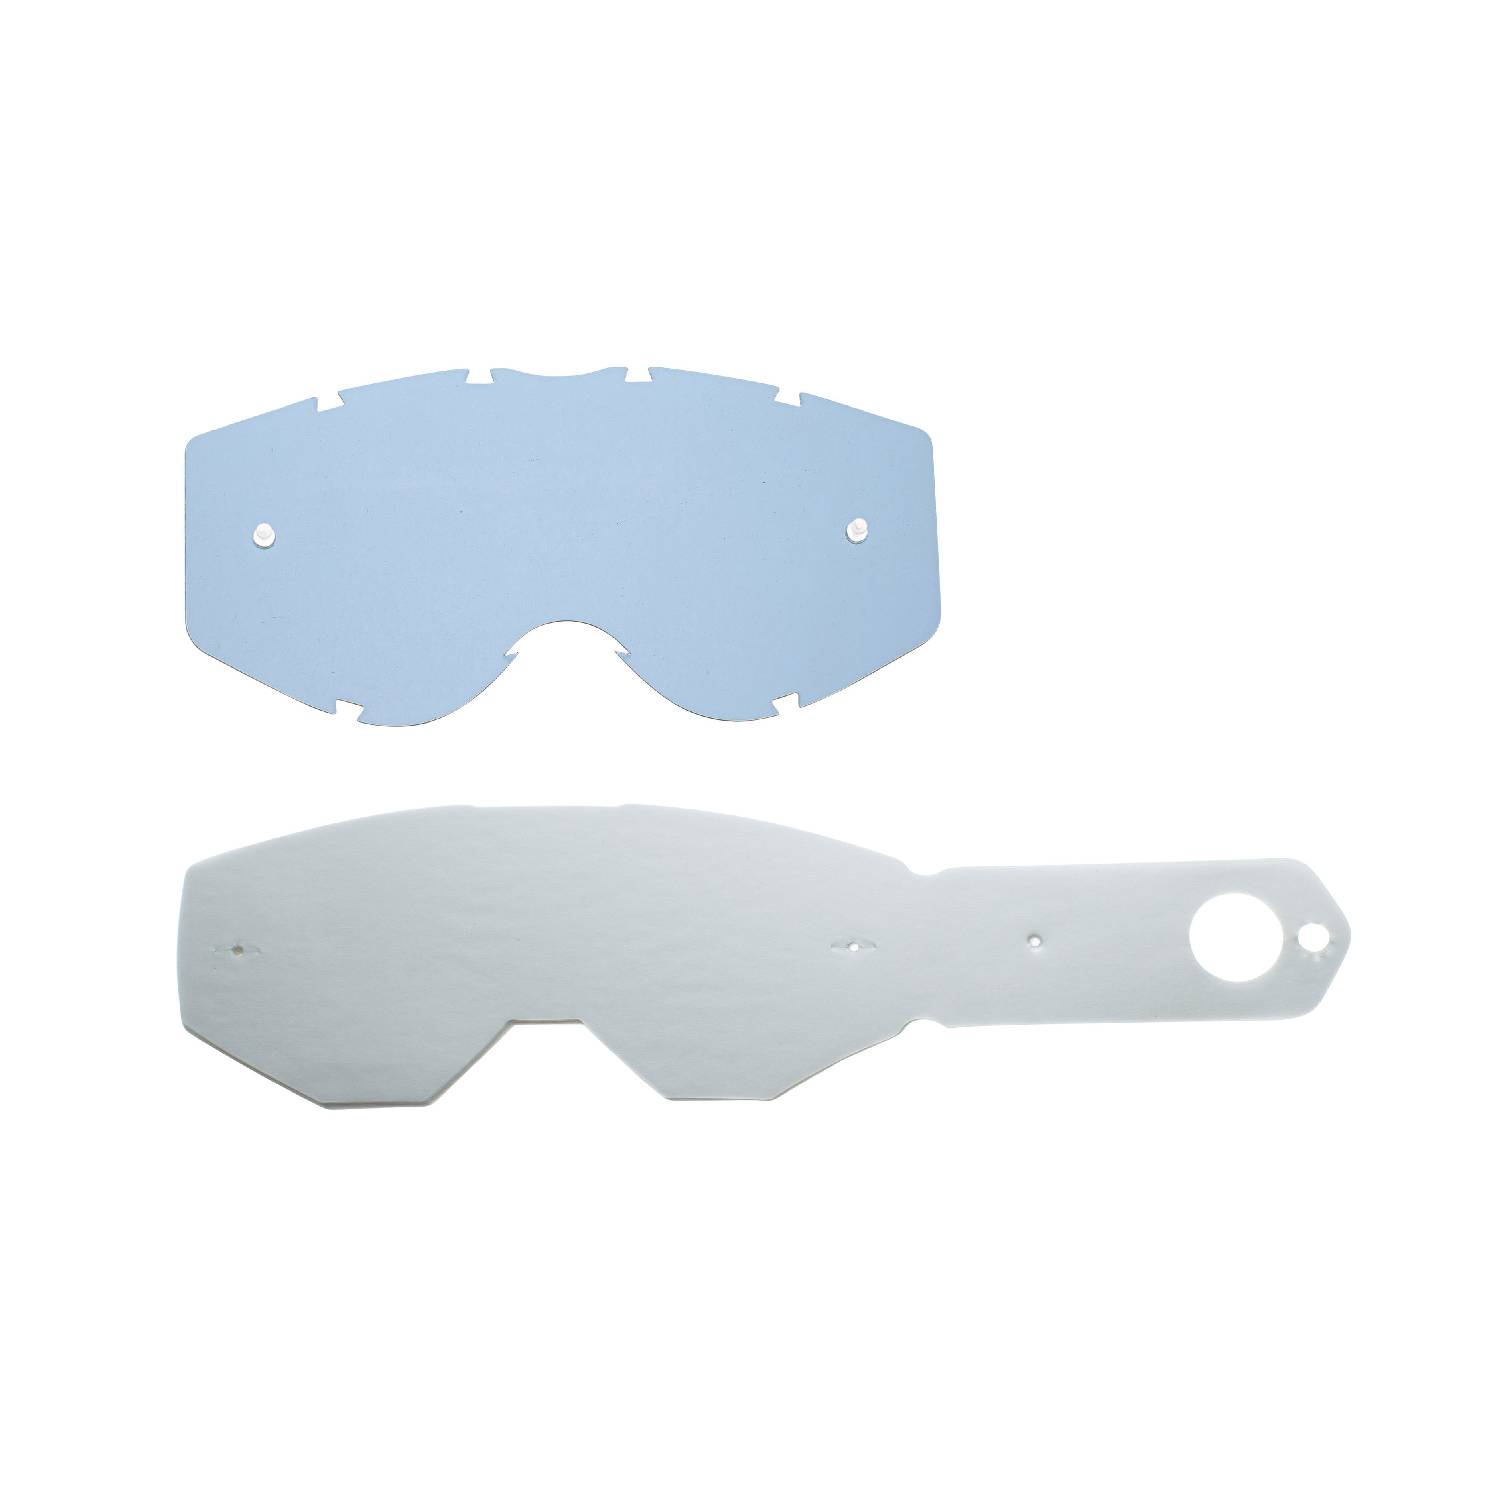 combo lenses with smokey lenses with 10 tear off compatible for Progrip 3303 Vista goggle